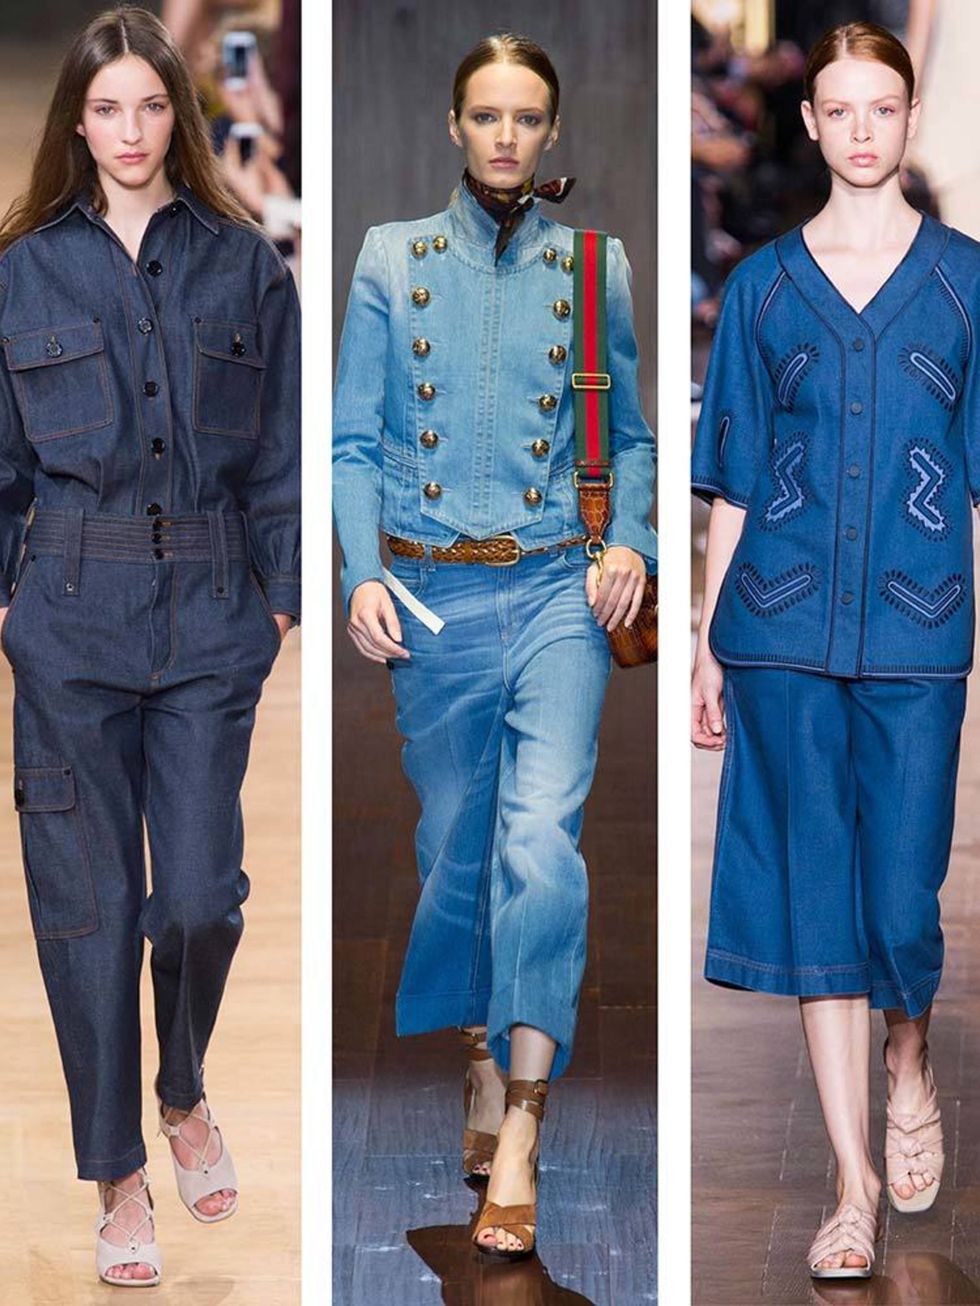 <p><strong>Look out for:</strong> <br />
Unexpected denim incarnations from motorcycle jackets, anoraks and formal coats that can even be worn to summer soirees. It's dressy-casual made easy.</p>

<p><strong>Seen at: </strong><br />
<a href="http://www.el